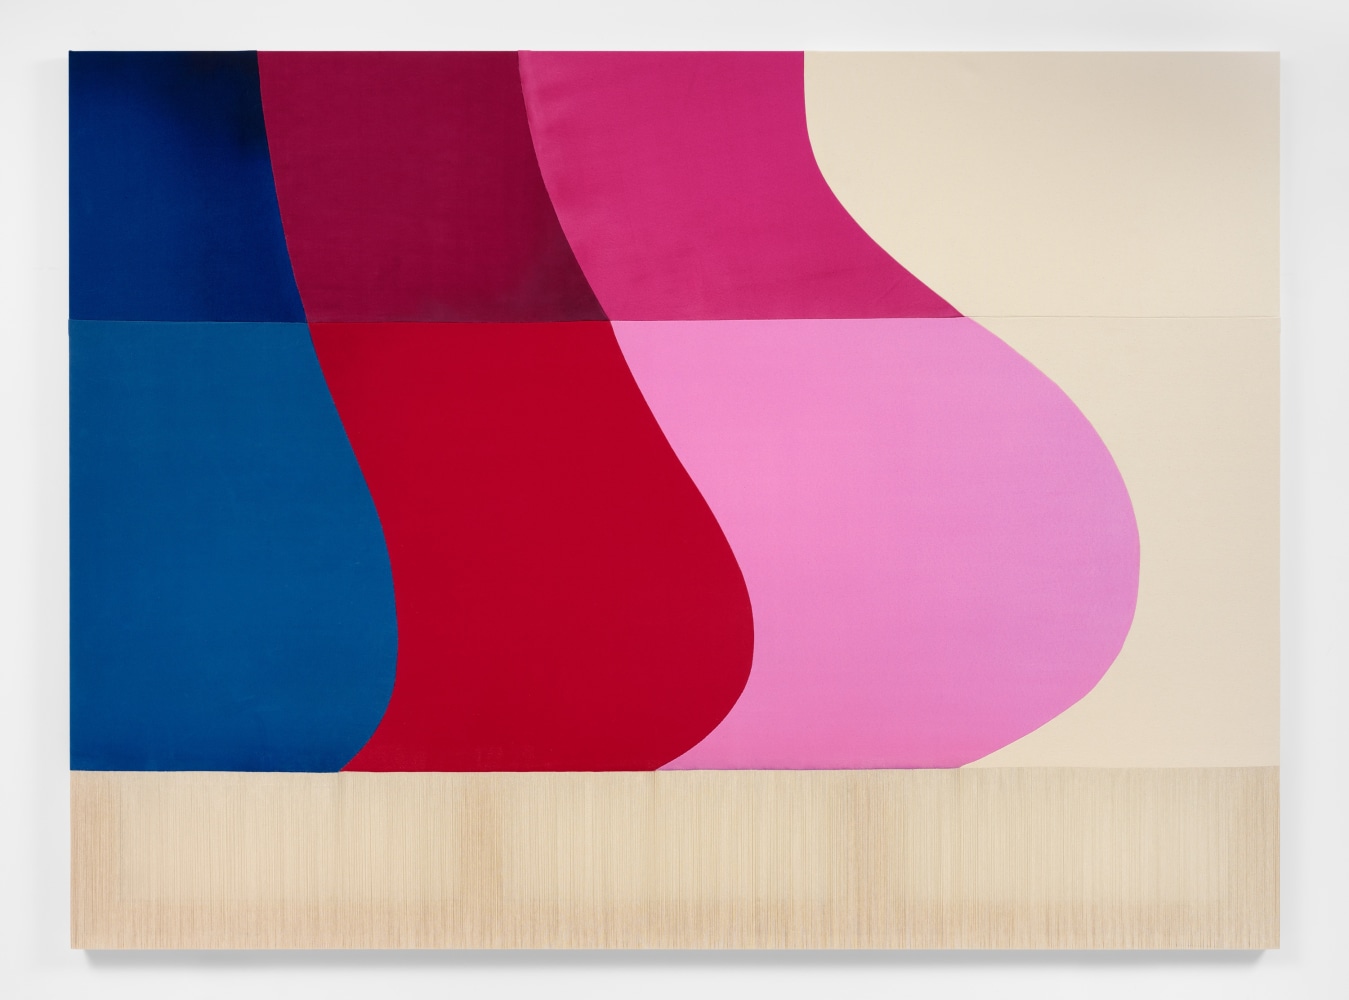 
Rebecca Ward

quickening, 2022

Acrylic, dye and flashe on stitched canvas

64 x 86 inches (162.6 x 218.4 cm)

&amp;nbsp;

Sold